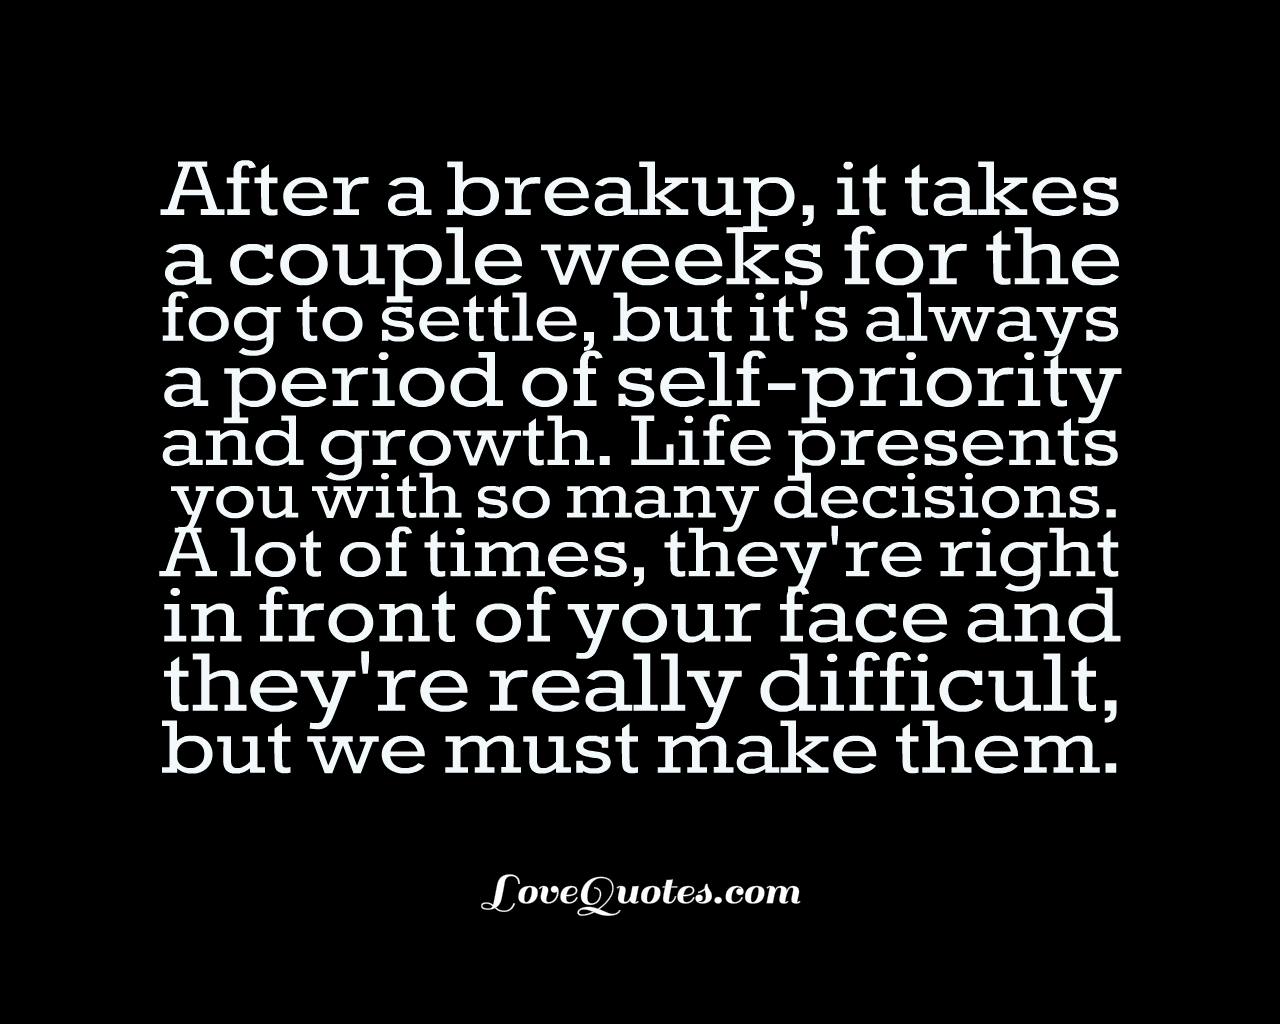 couples breaking up quotes